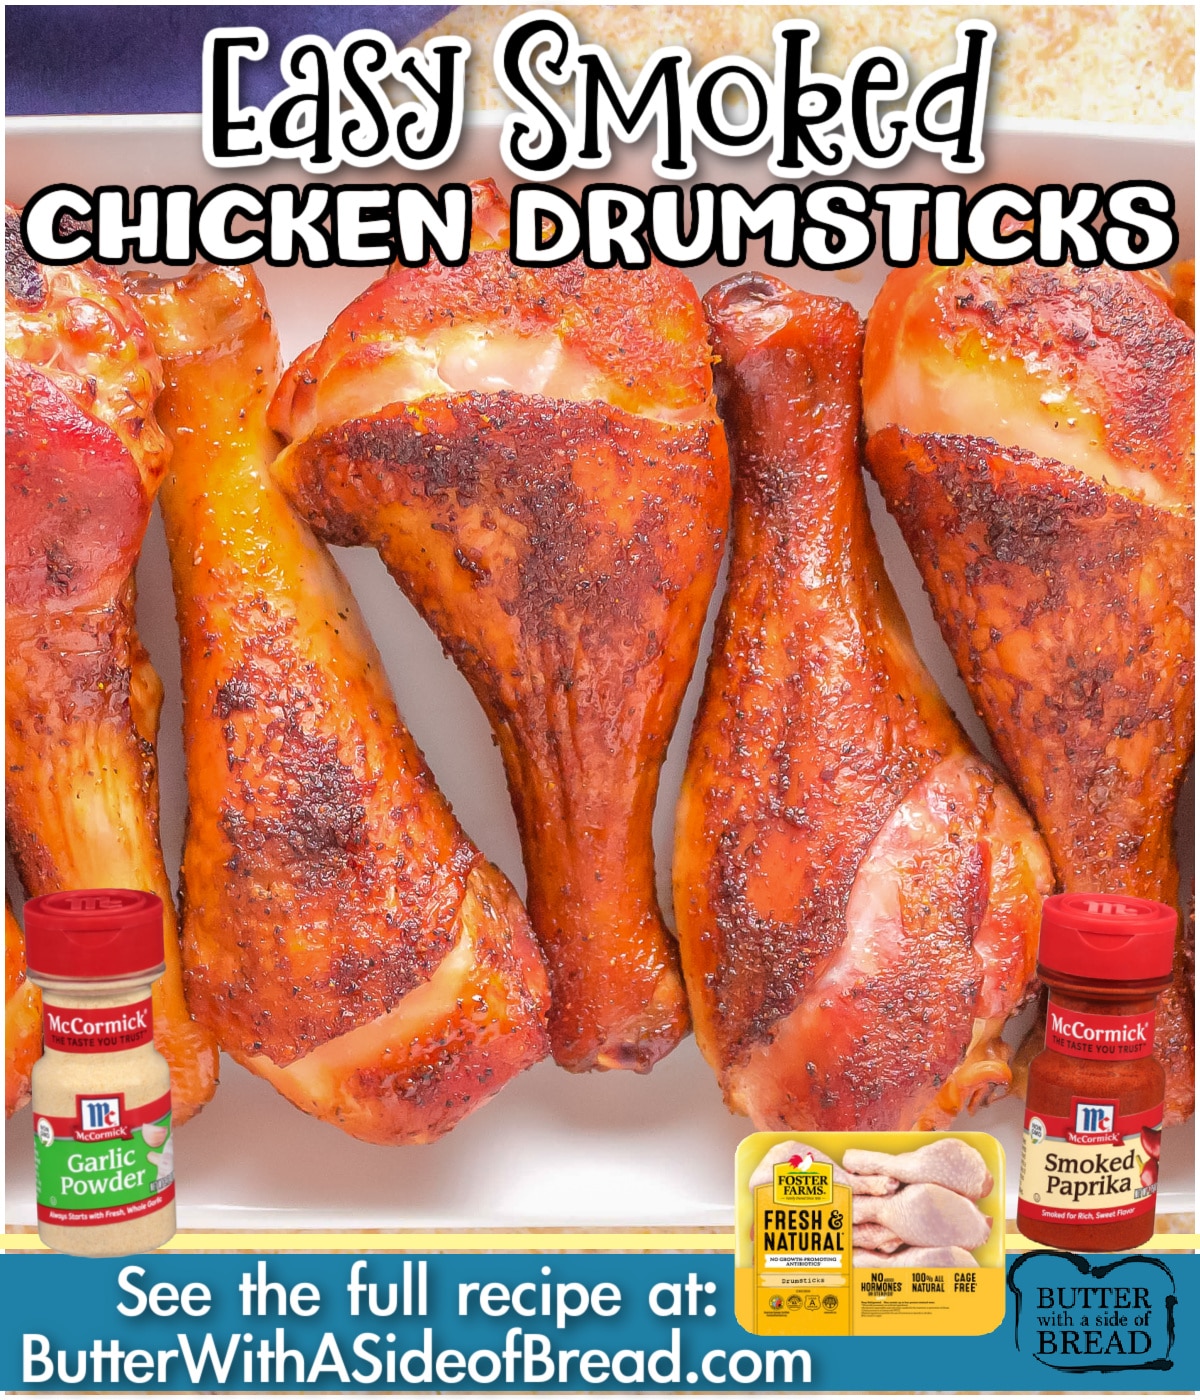 Easy Smoked Chicken Drumsticks are packed with flavor, perfectly juicy and are so easy to prepare! These smoker chicken legs use basic seasonings and everyone goes crazy over them!